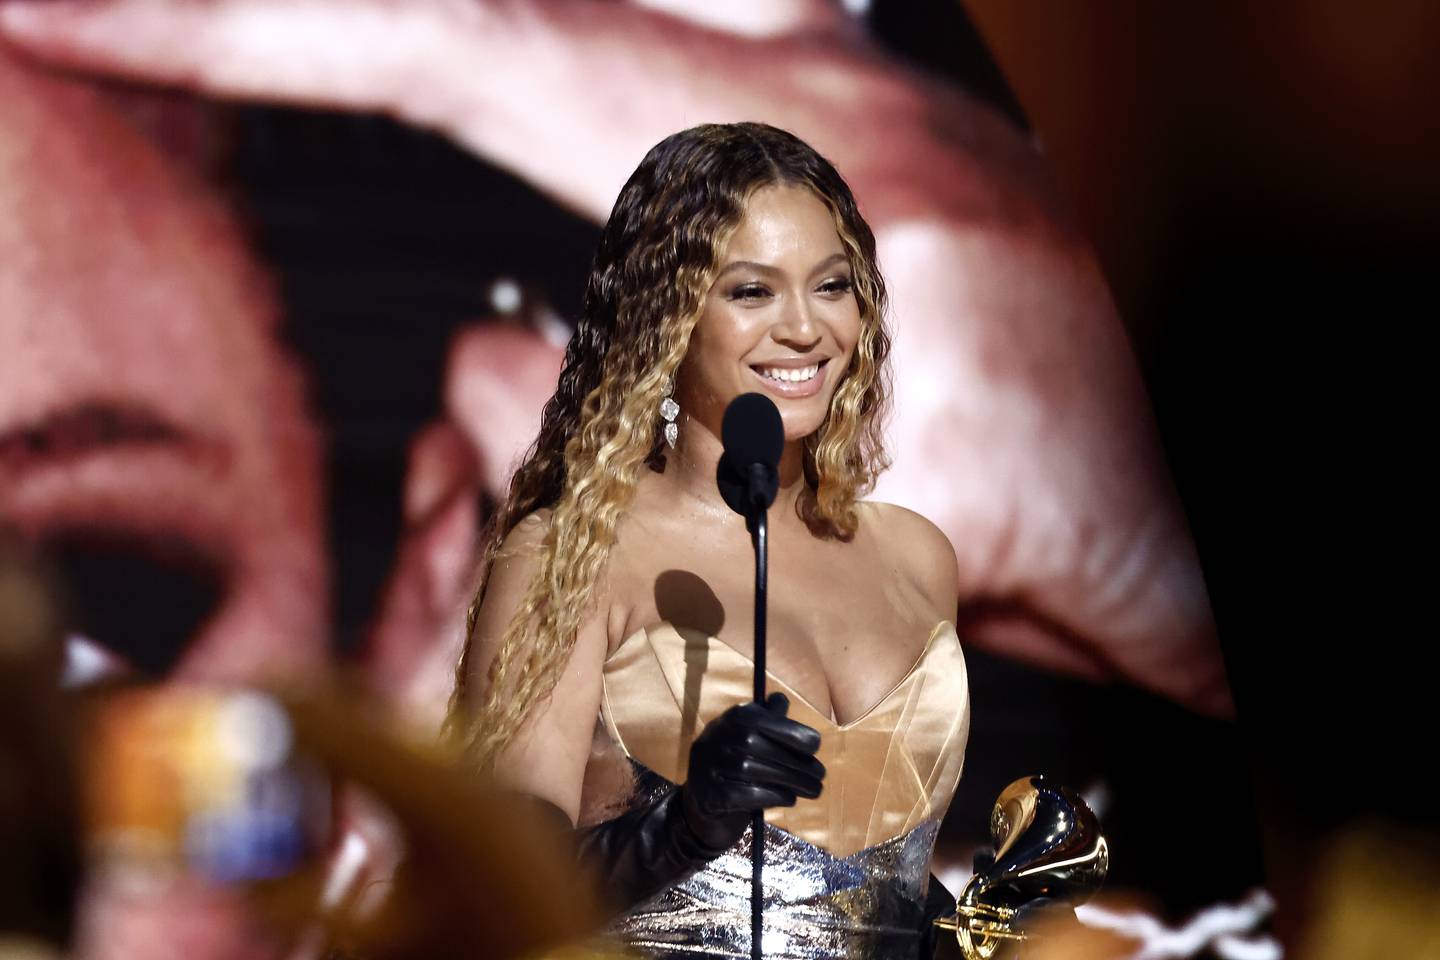 Beyoncé smiles as she accepts a Grammy Award wearing a gown and standing in front of a microphone.